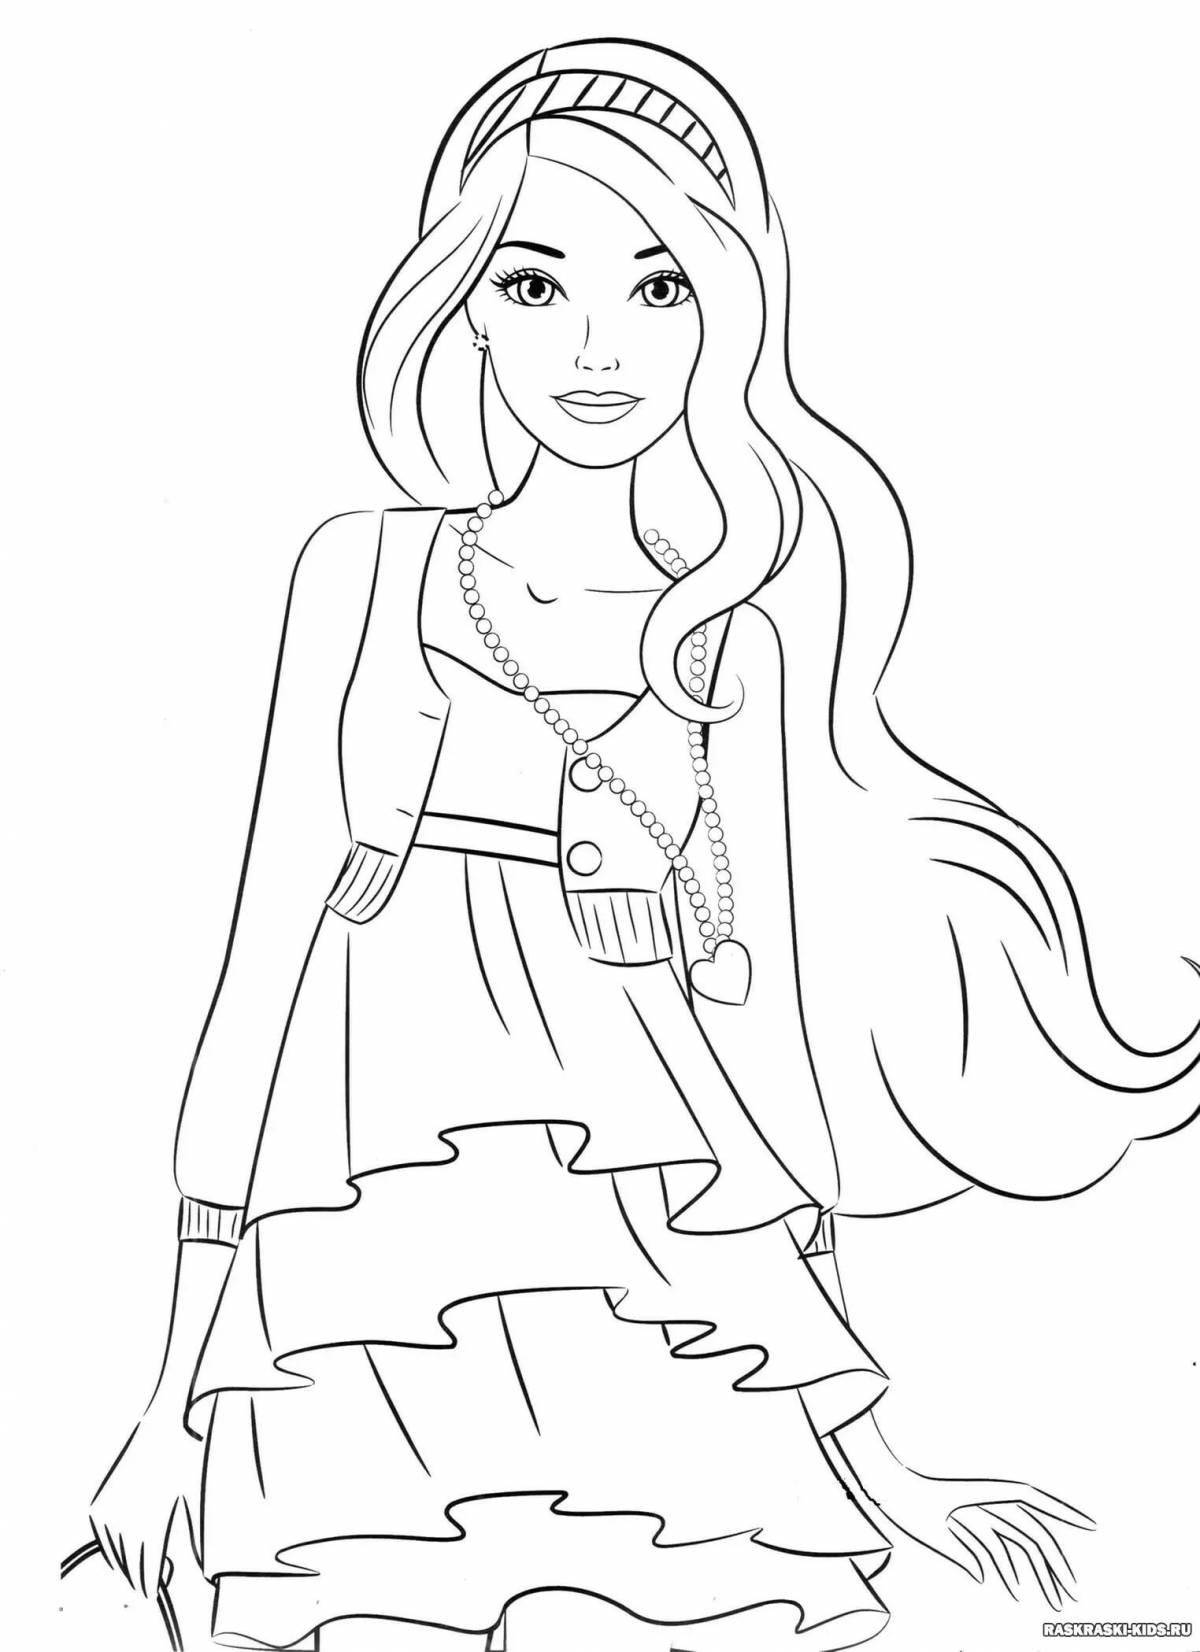 Stylish coloring book for girls for kids